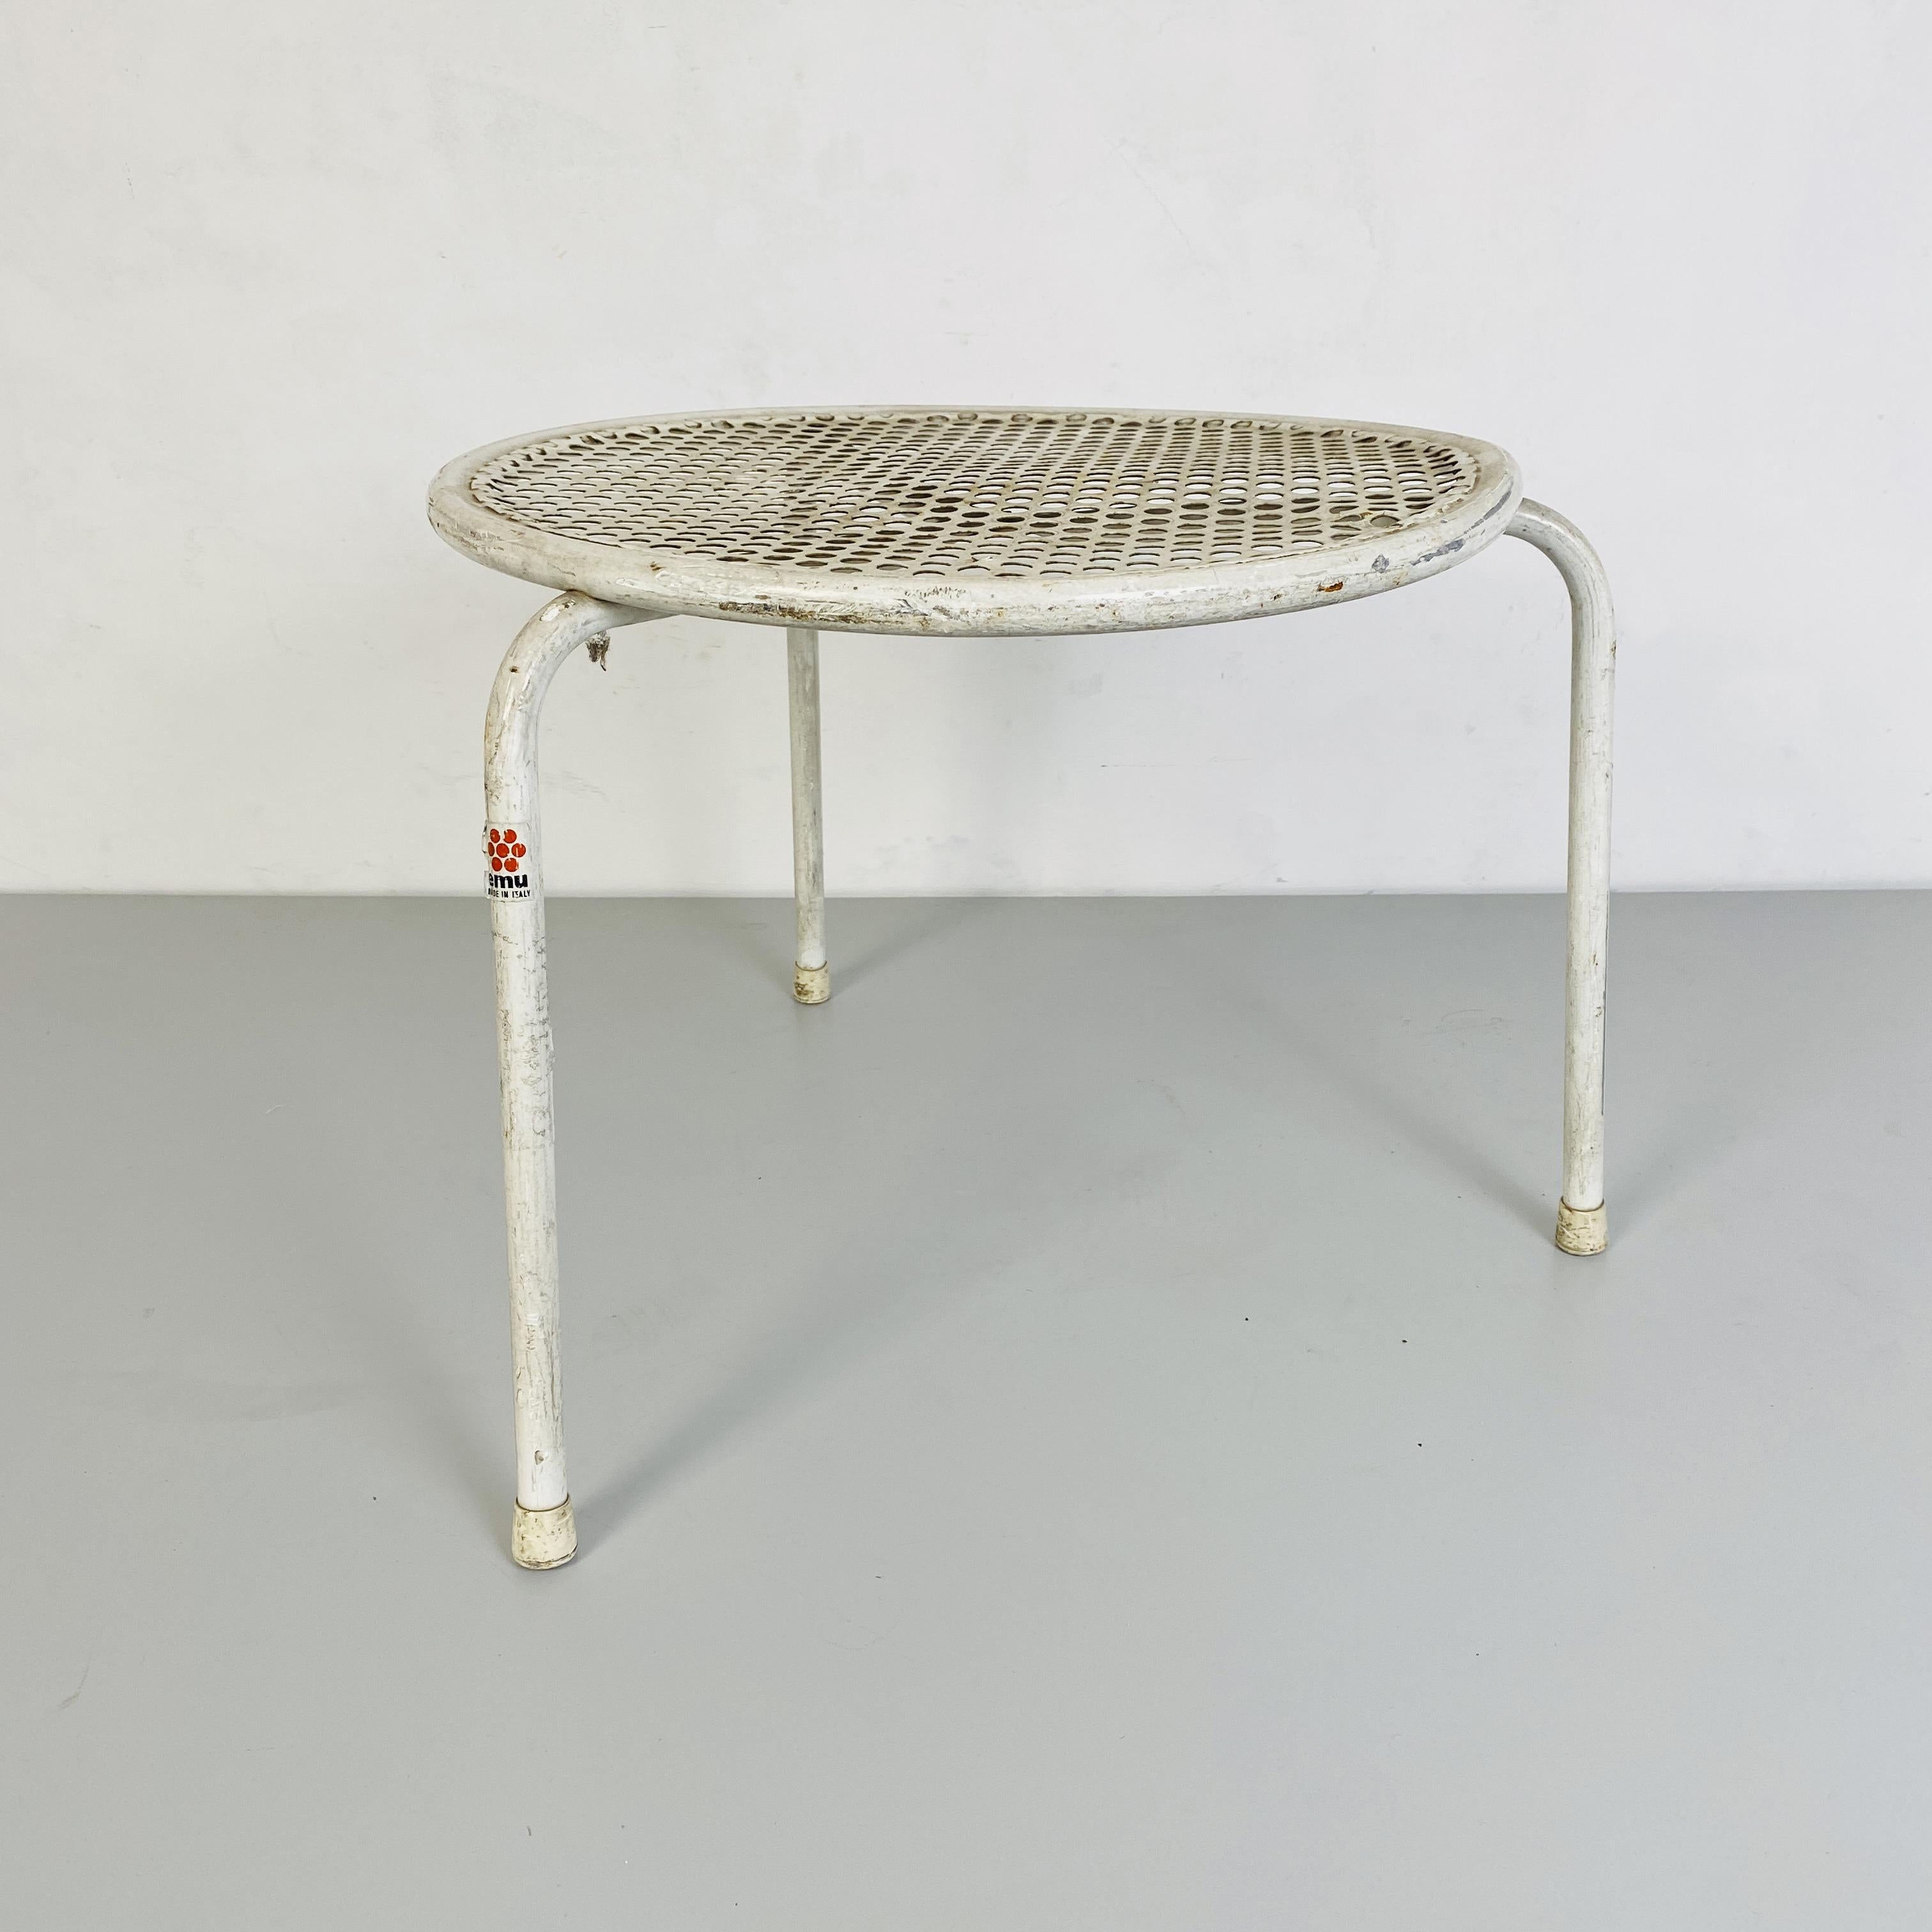 Mid-20th Century Italian Mid-Century Modern Perforated Metal Outdoor Table by Emu, 1960s For Sale